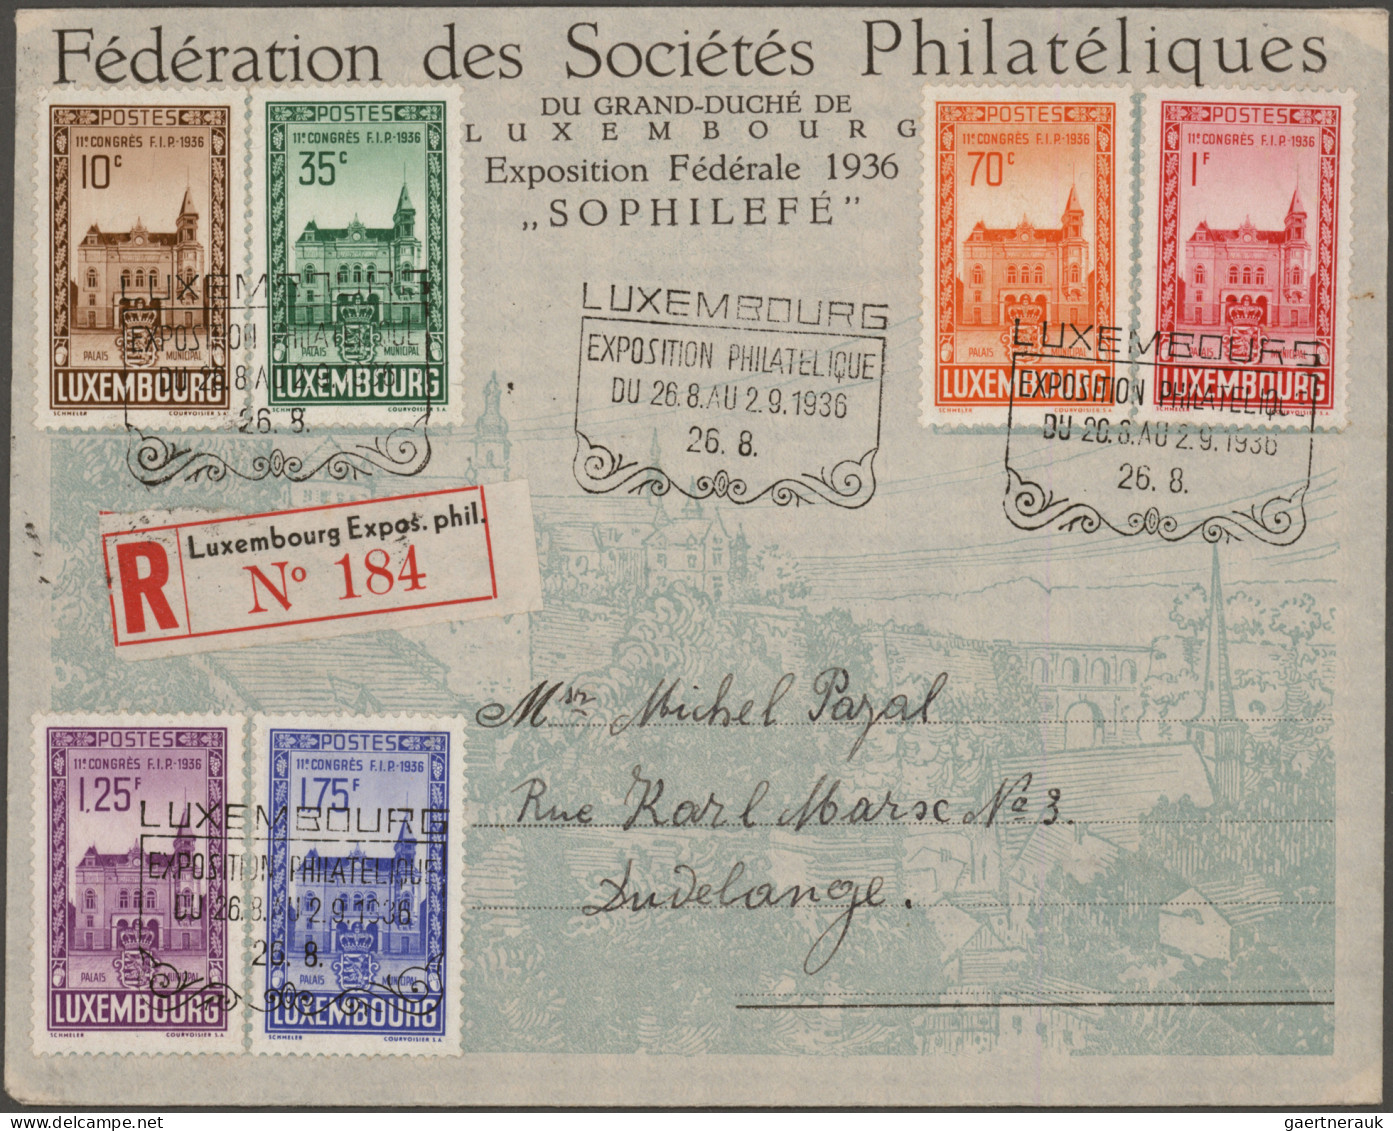 Luxembourg: 1920/2010 (ca.), holding of 2.000+ covers/cards, comprising commerci